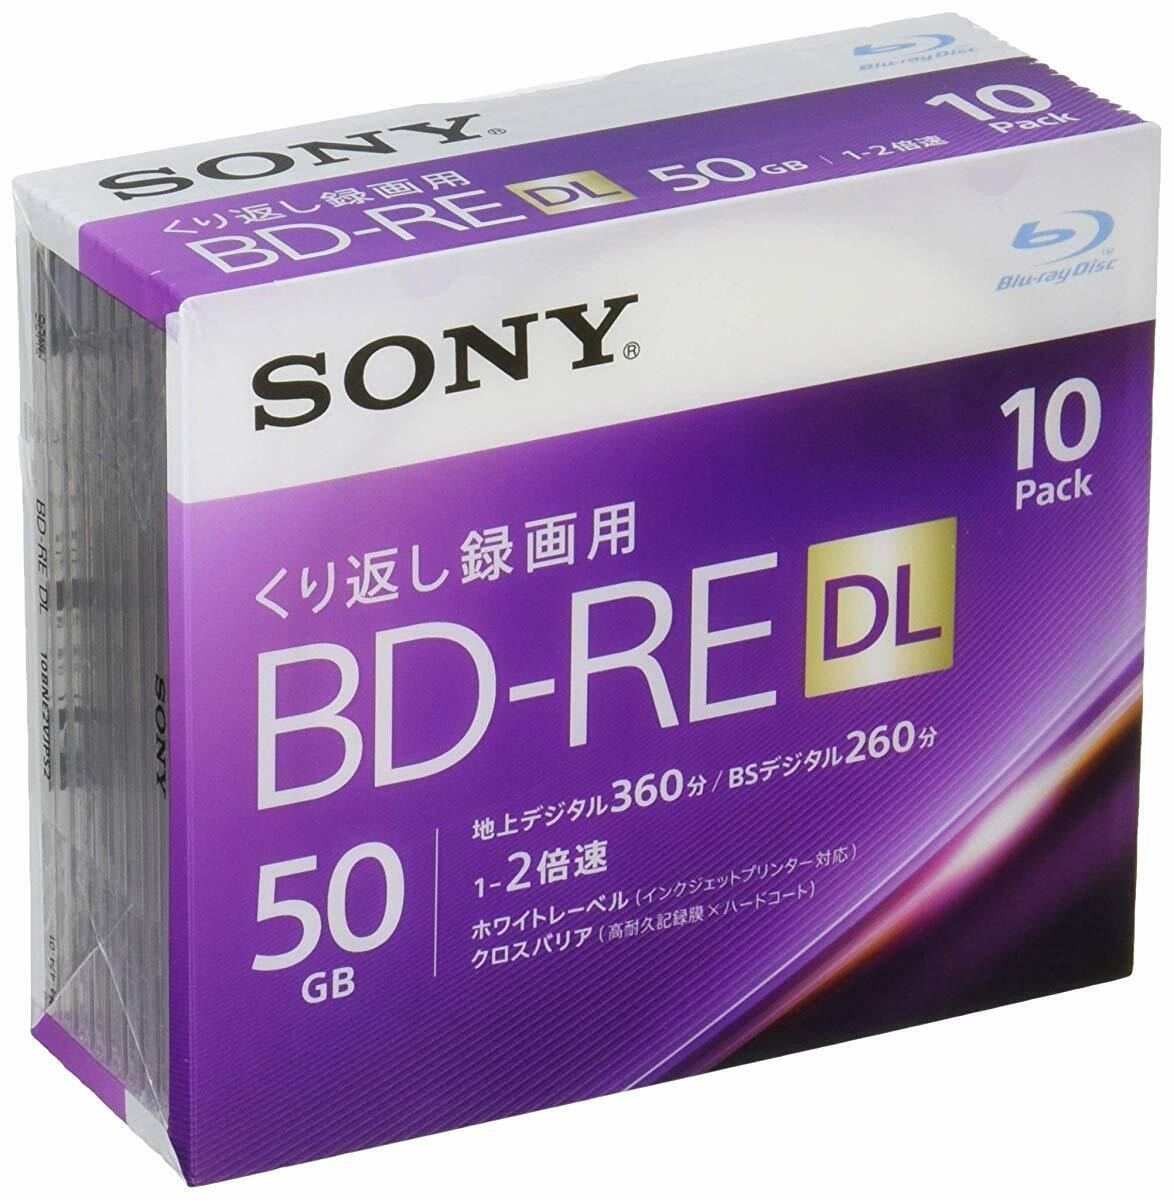 Sony Blu-ray Blank Disc 50GB BD-RE DL Dual 2 Layer x 10pack bluray Import Japan